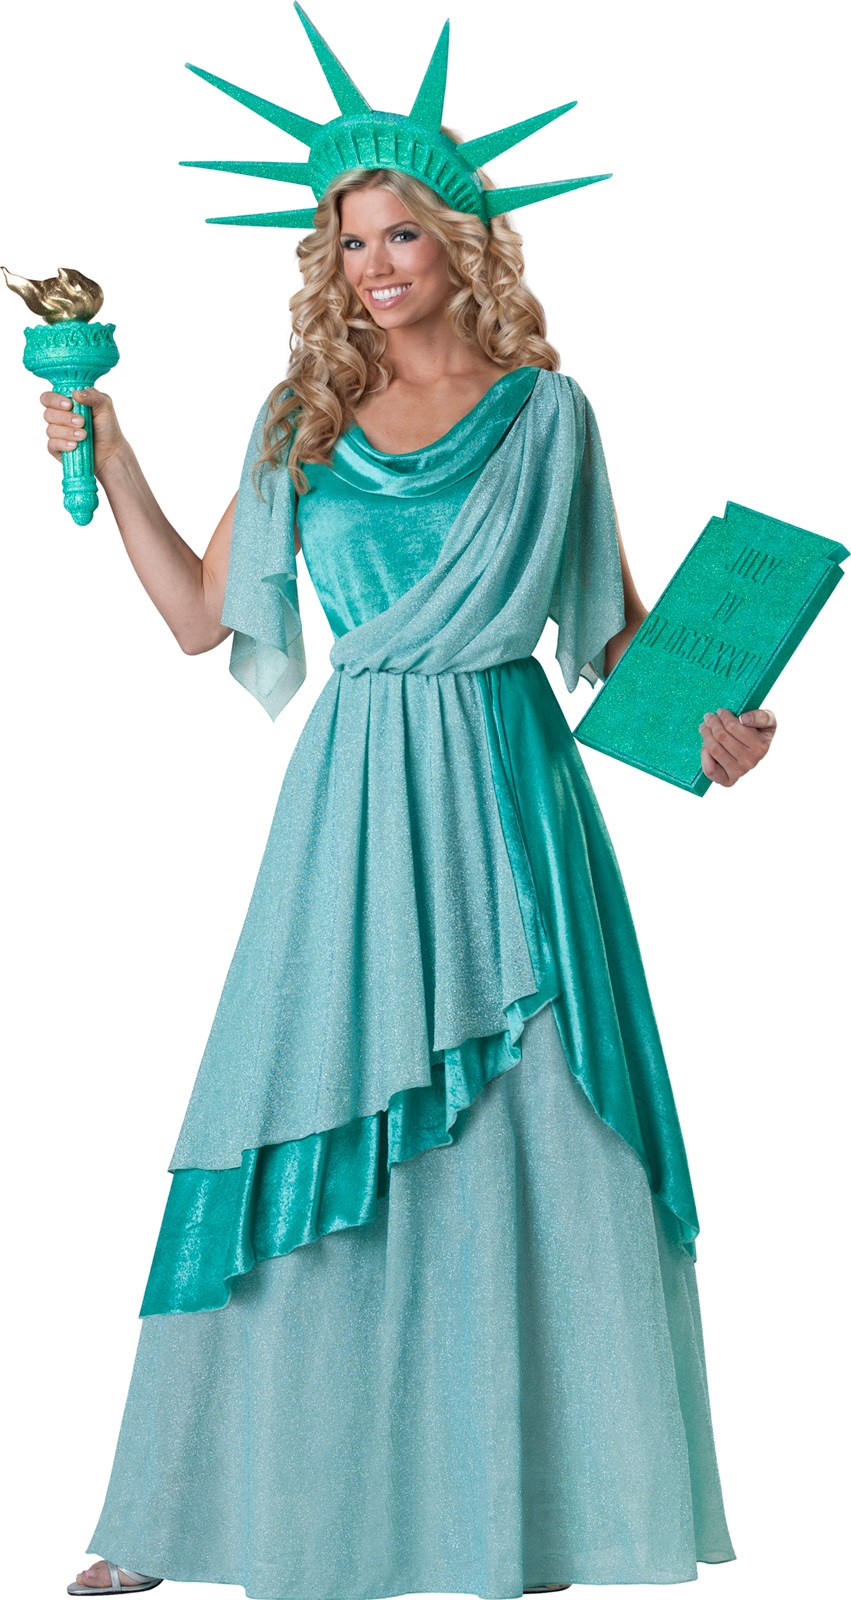 Lady Liberty Elite Collection Adult Costume